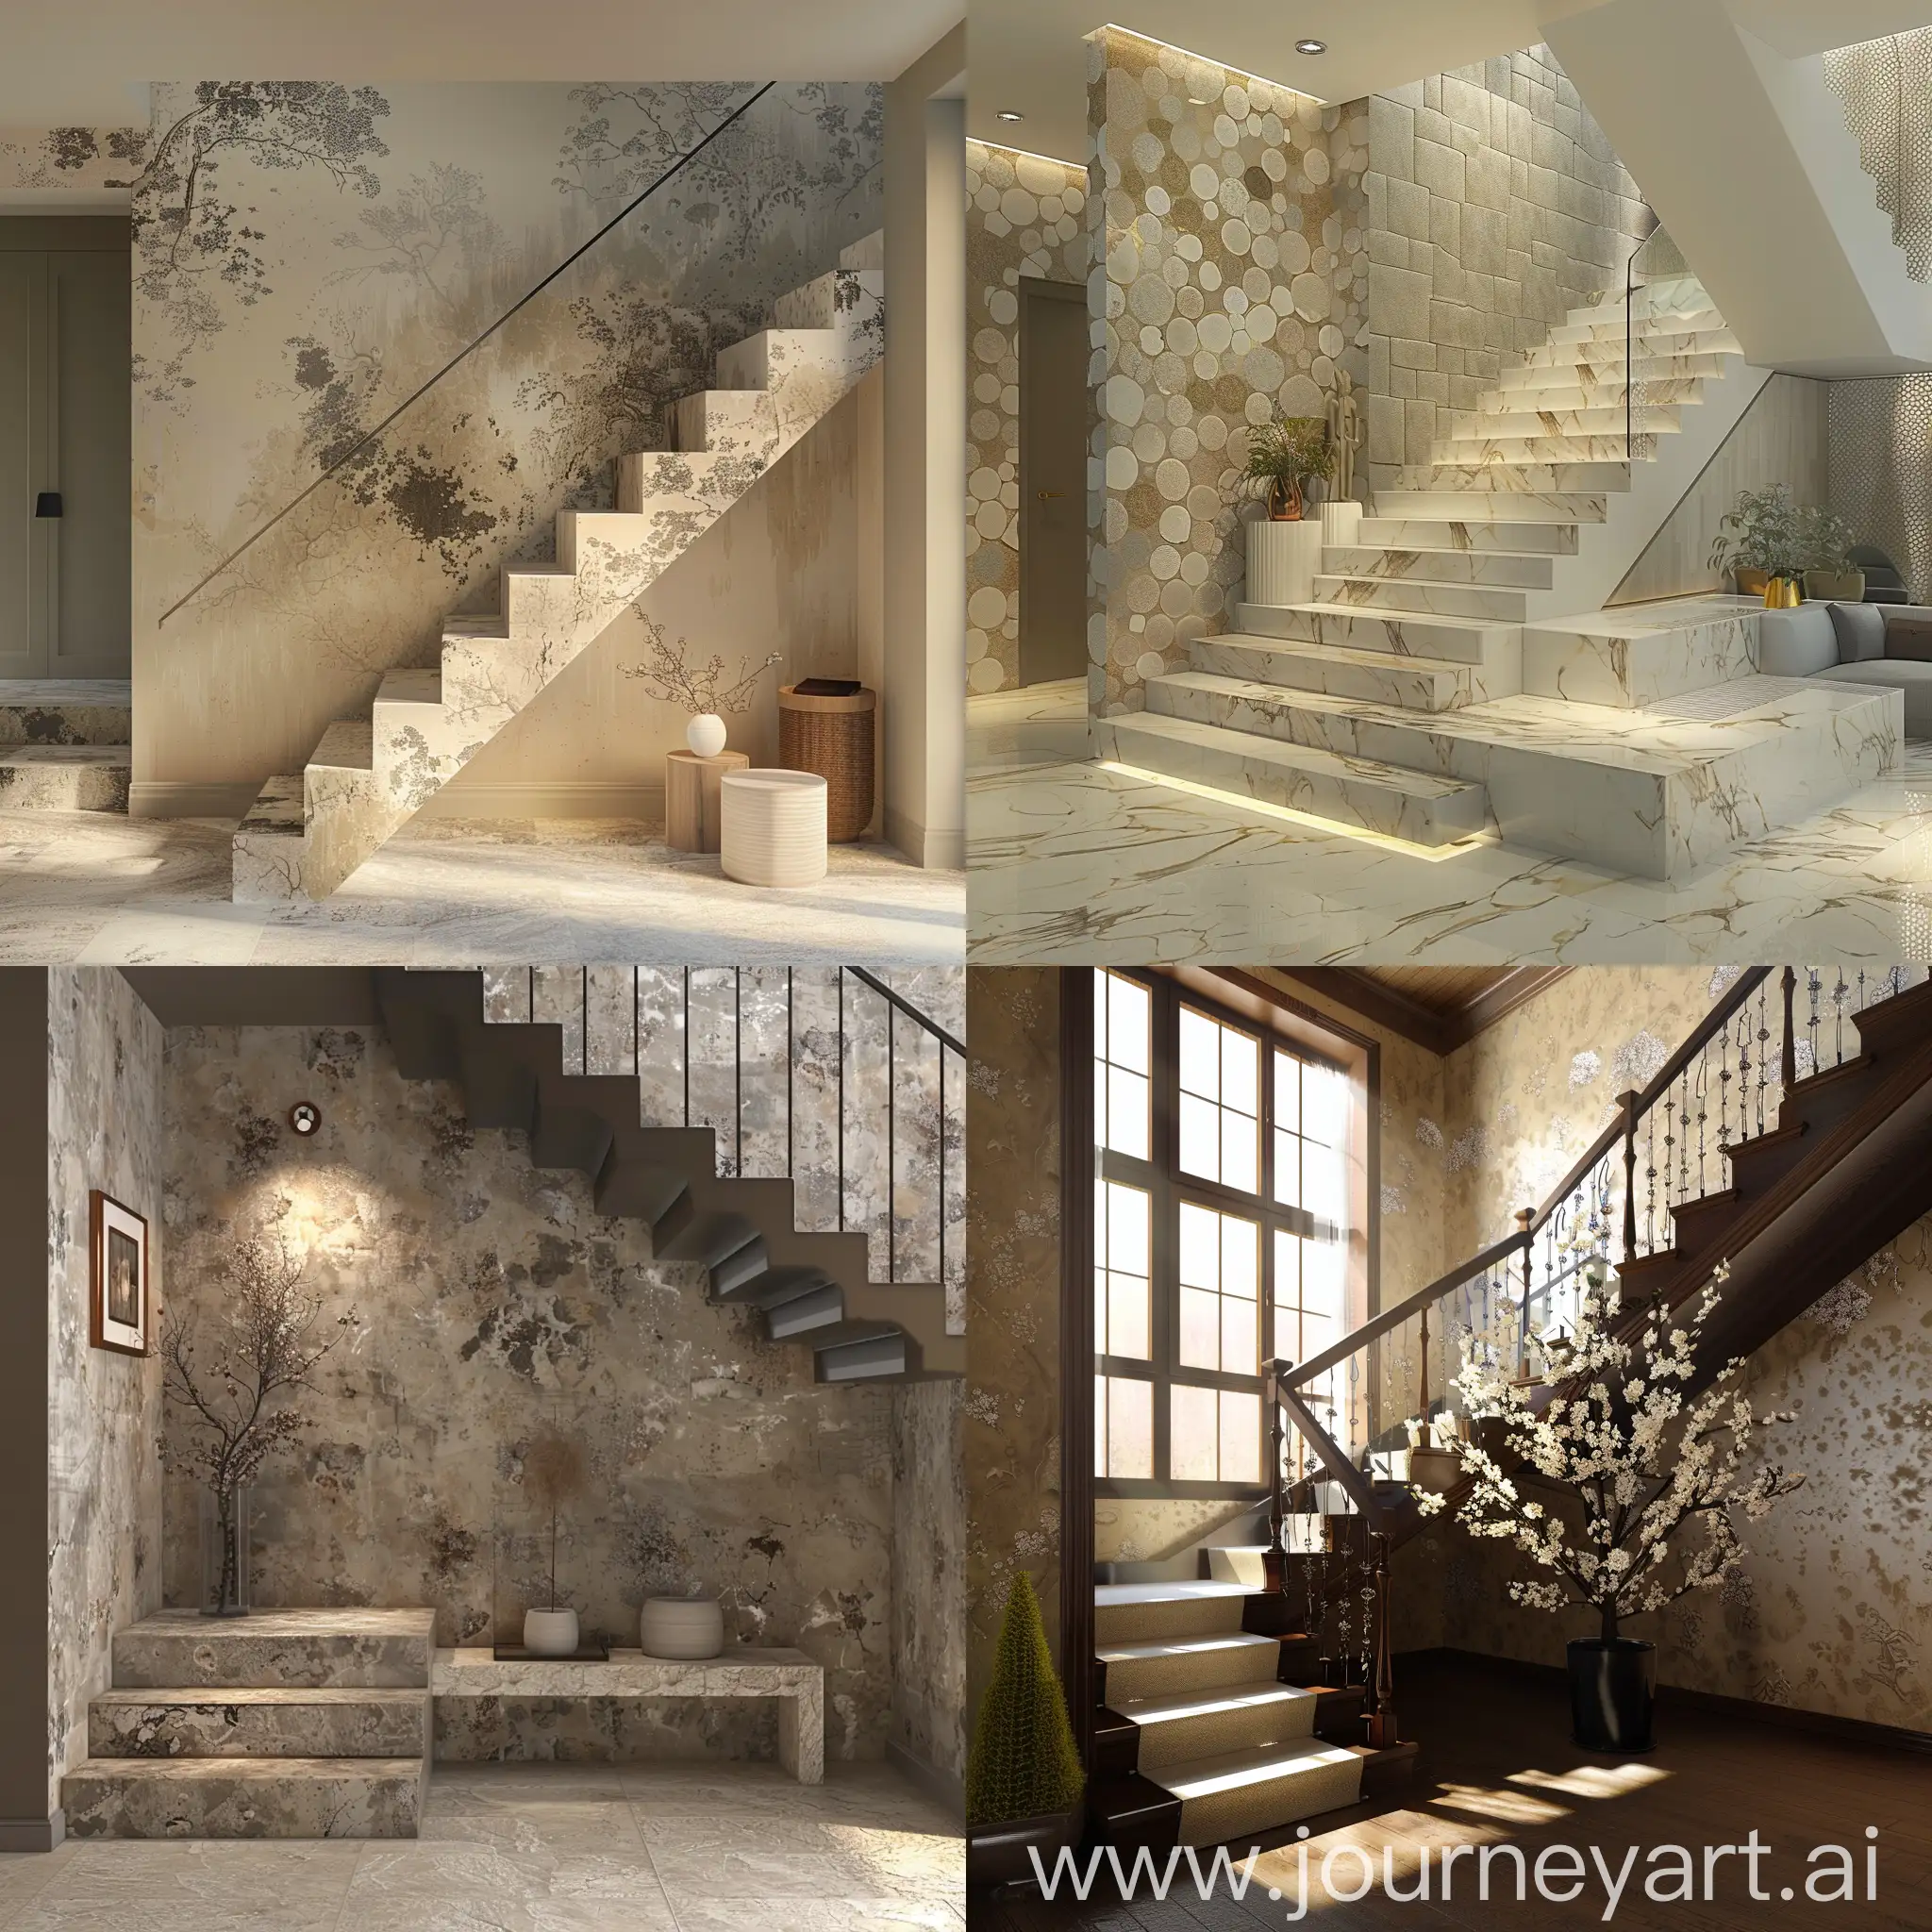 design a staircse midlanding for interior of a house with wallpaers and texturefor a home interior with wallpaper and textures.